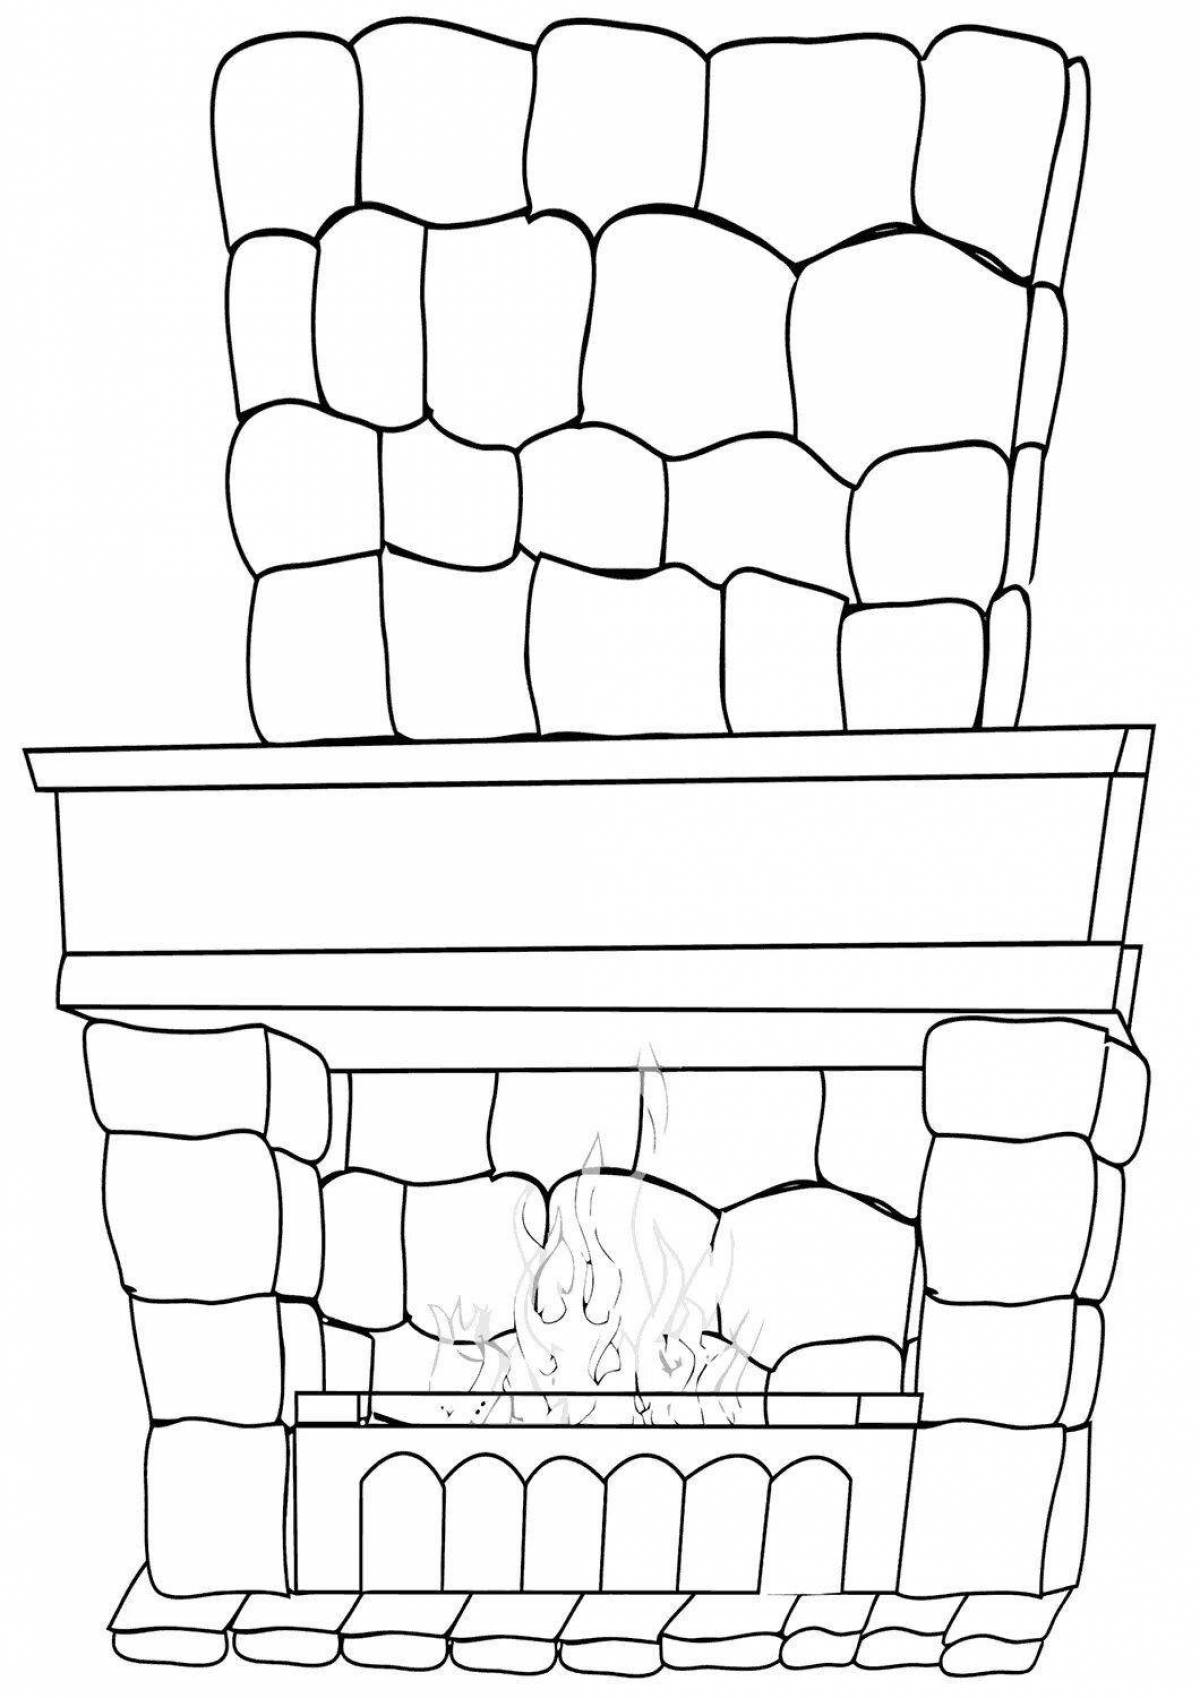 Relaxing fireplace coloring book